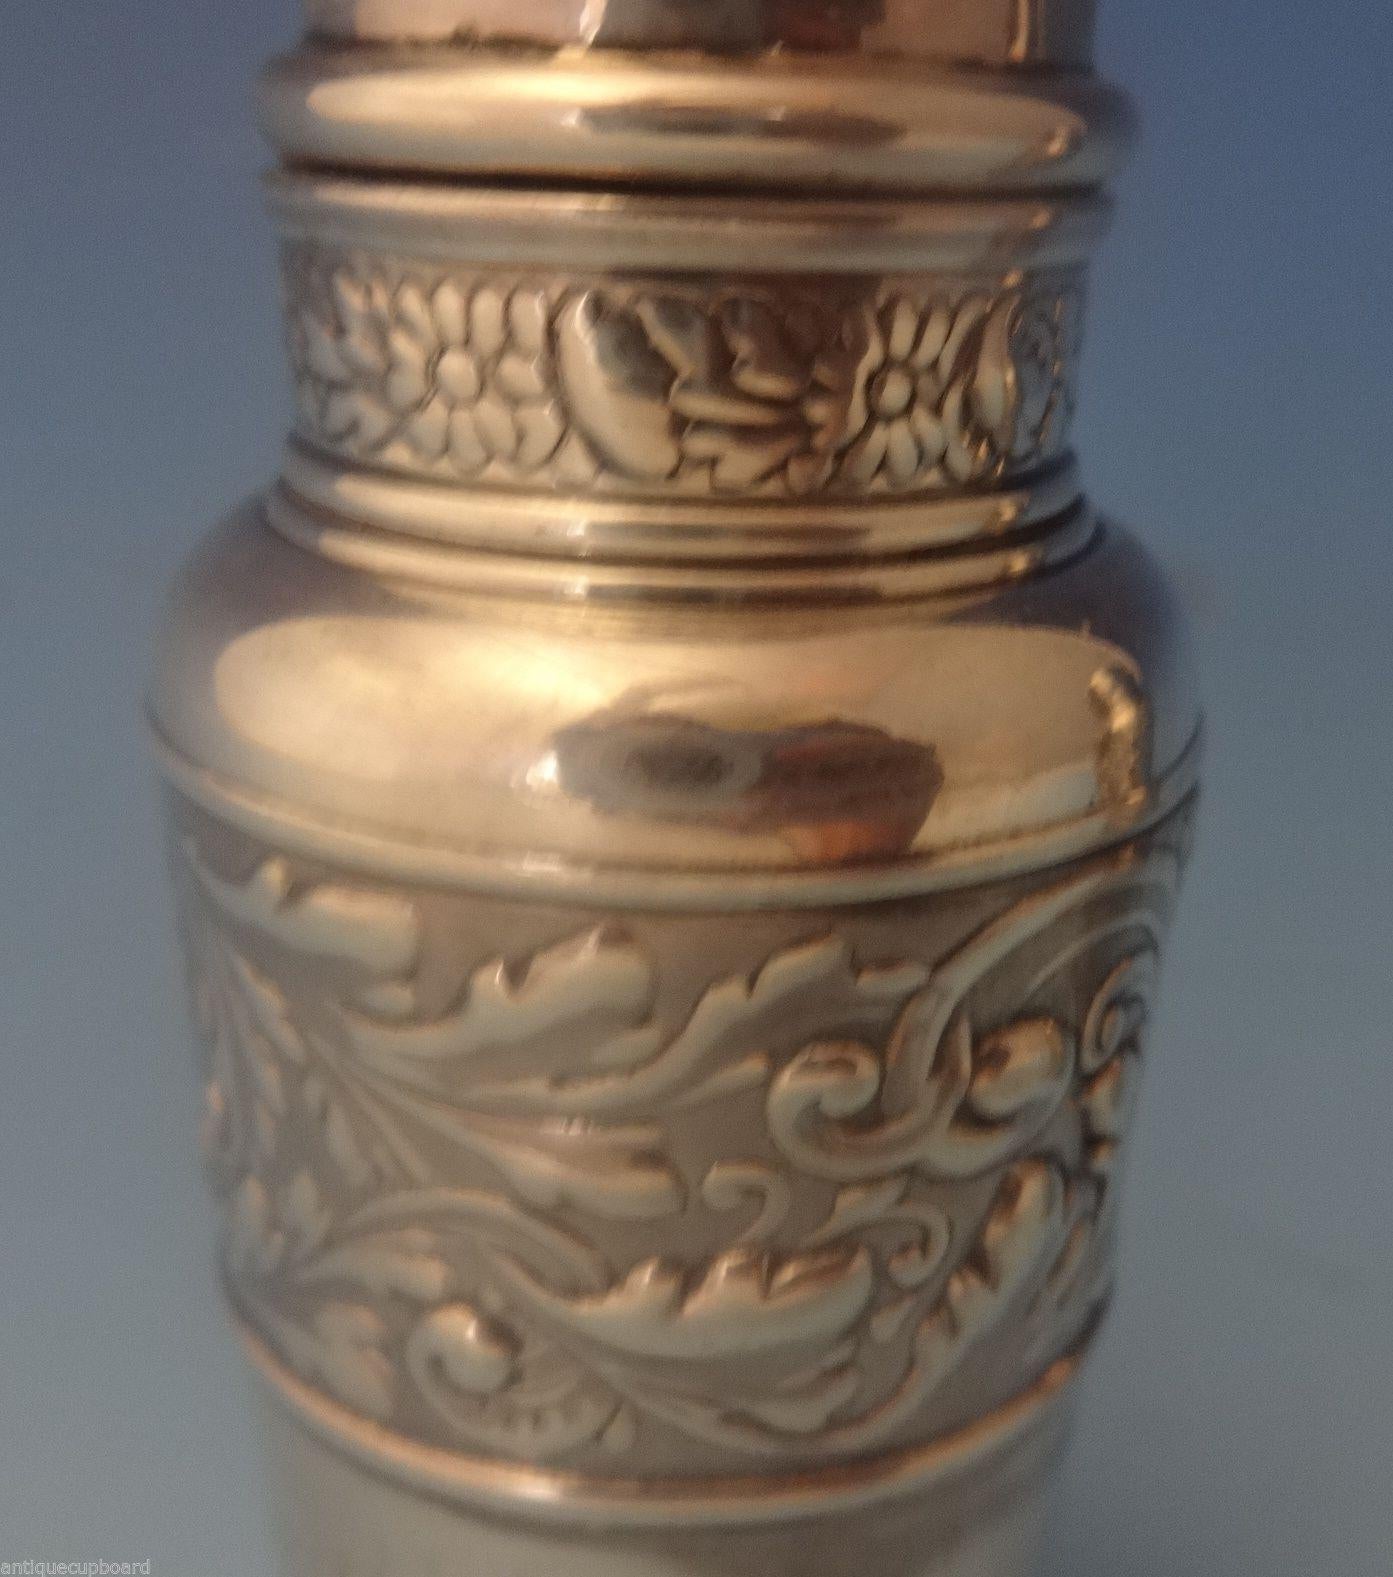 Saint Cloud by Gorham Saint Cloud by Gorham sterling salt and pepper shakers 2-piece set. They date from the 1890s and are marked #2810. The measurements for the pieces are 3 1/2 tall, 1 1/2 wide, and together they weigh 3.4 ozt. The pieces are not